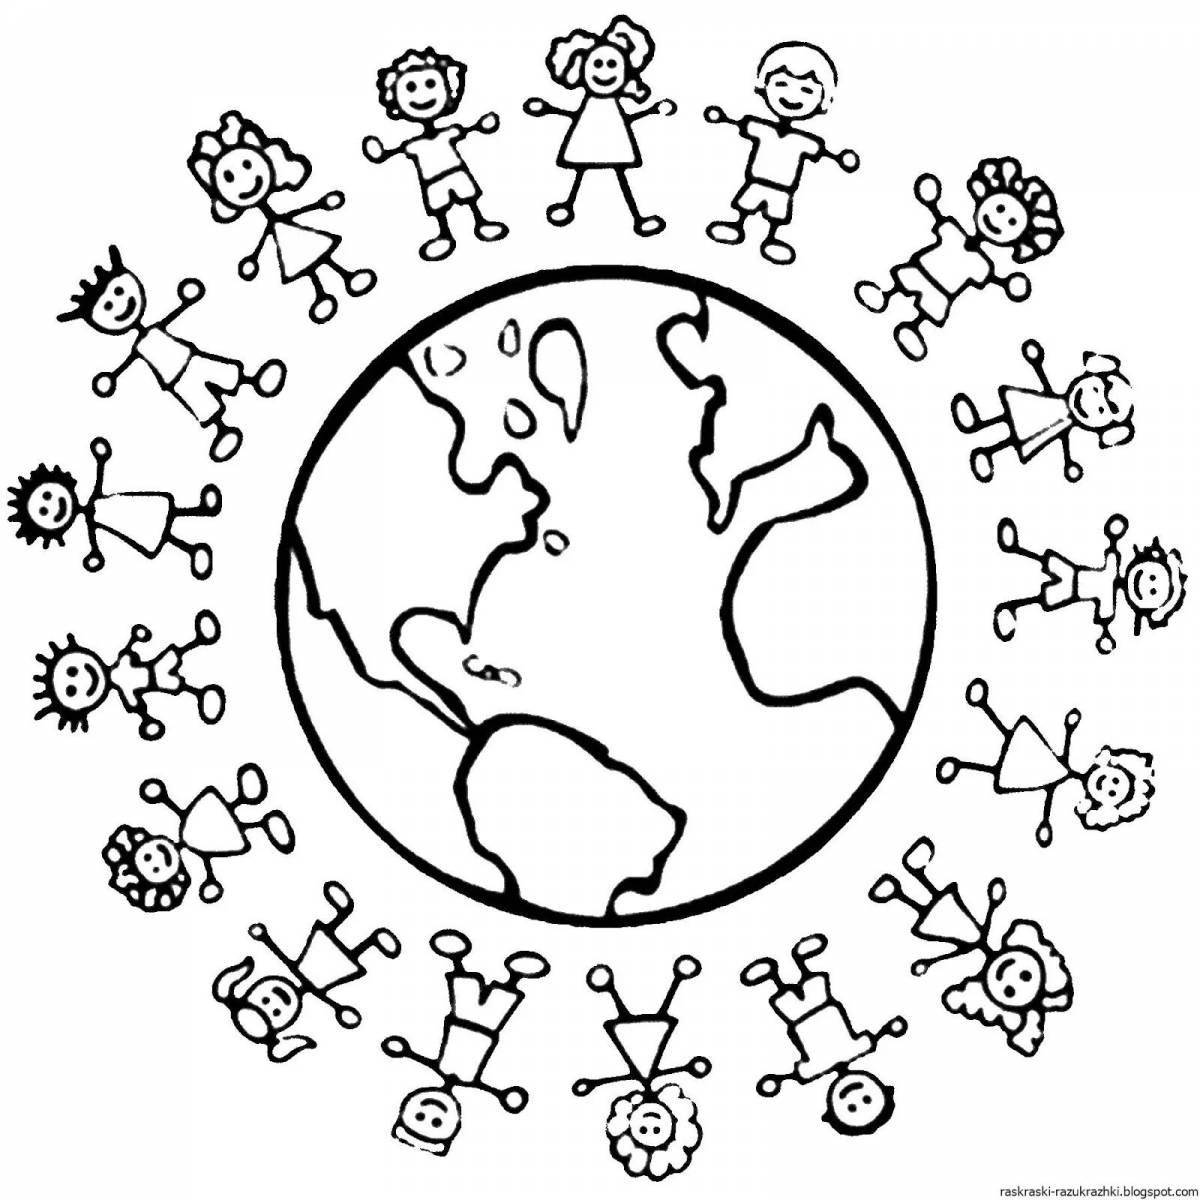 Coloring page harmonious peace on earth